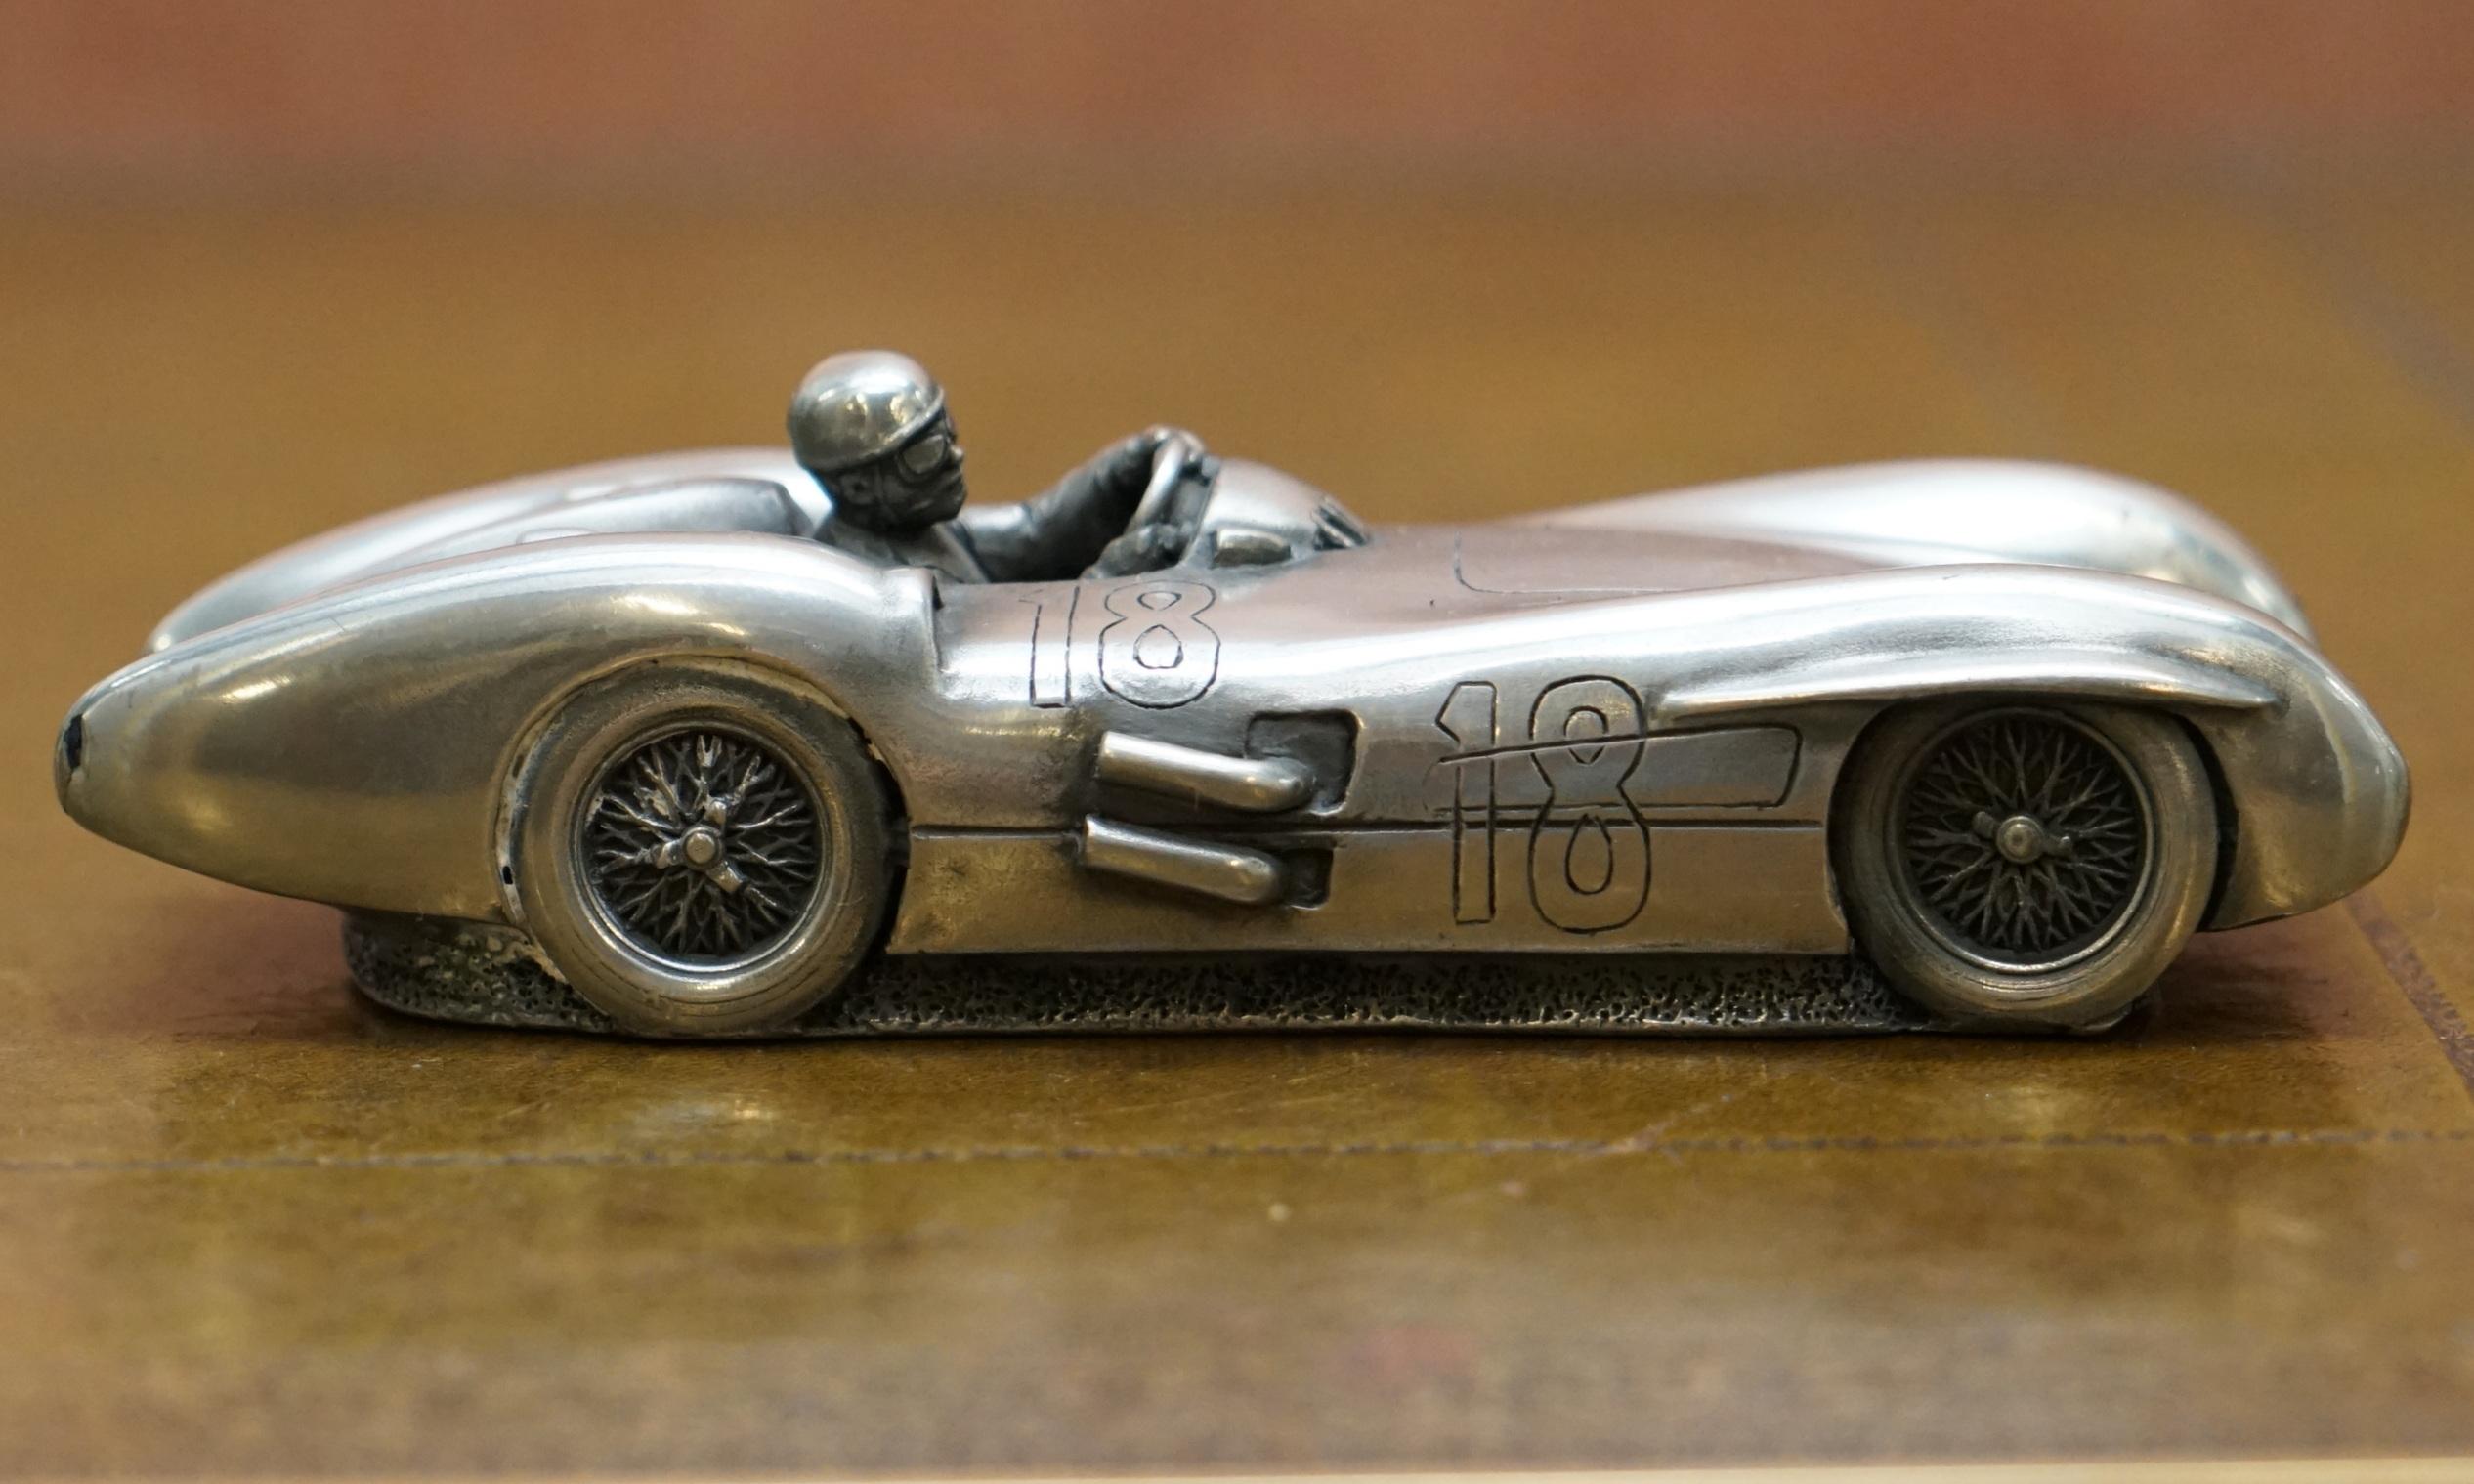 We are delighted to this lovely original Pewter-plated small sized Compulsion gallery 1939 Mercedes-Benz W196 300SLR racing car model

This is a small size, it’s in perfect vintage condition

Monza streamlined type Monza bodywork

The W196s